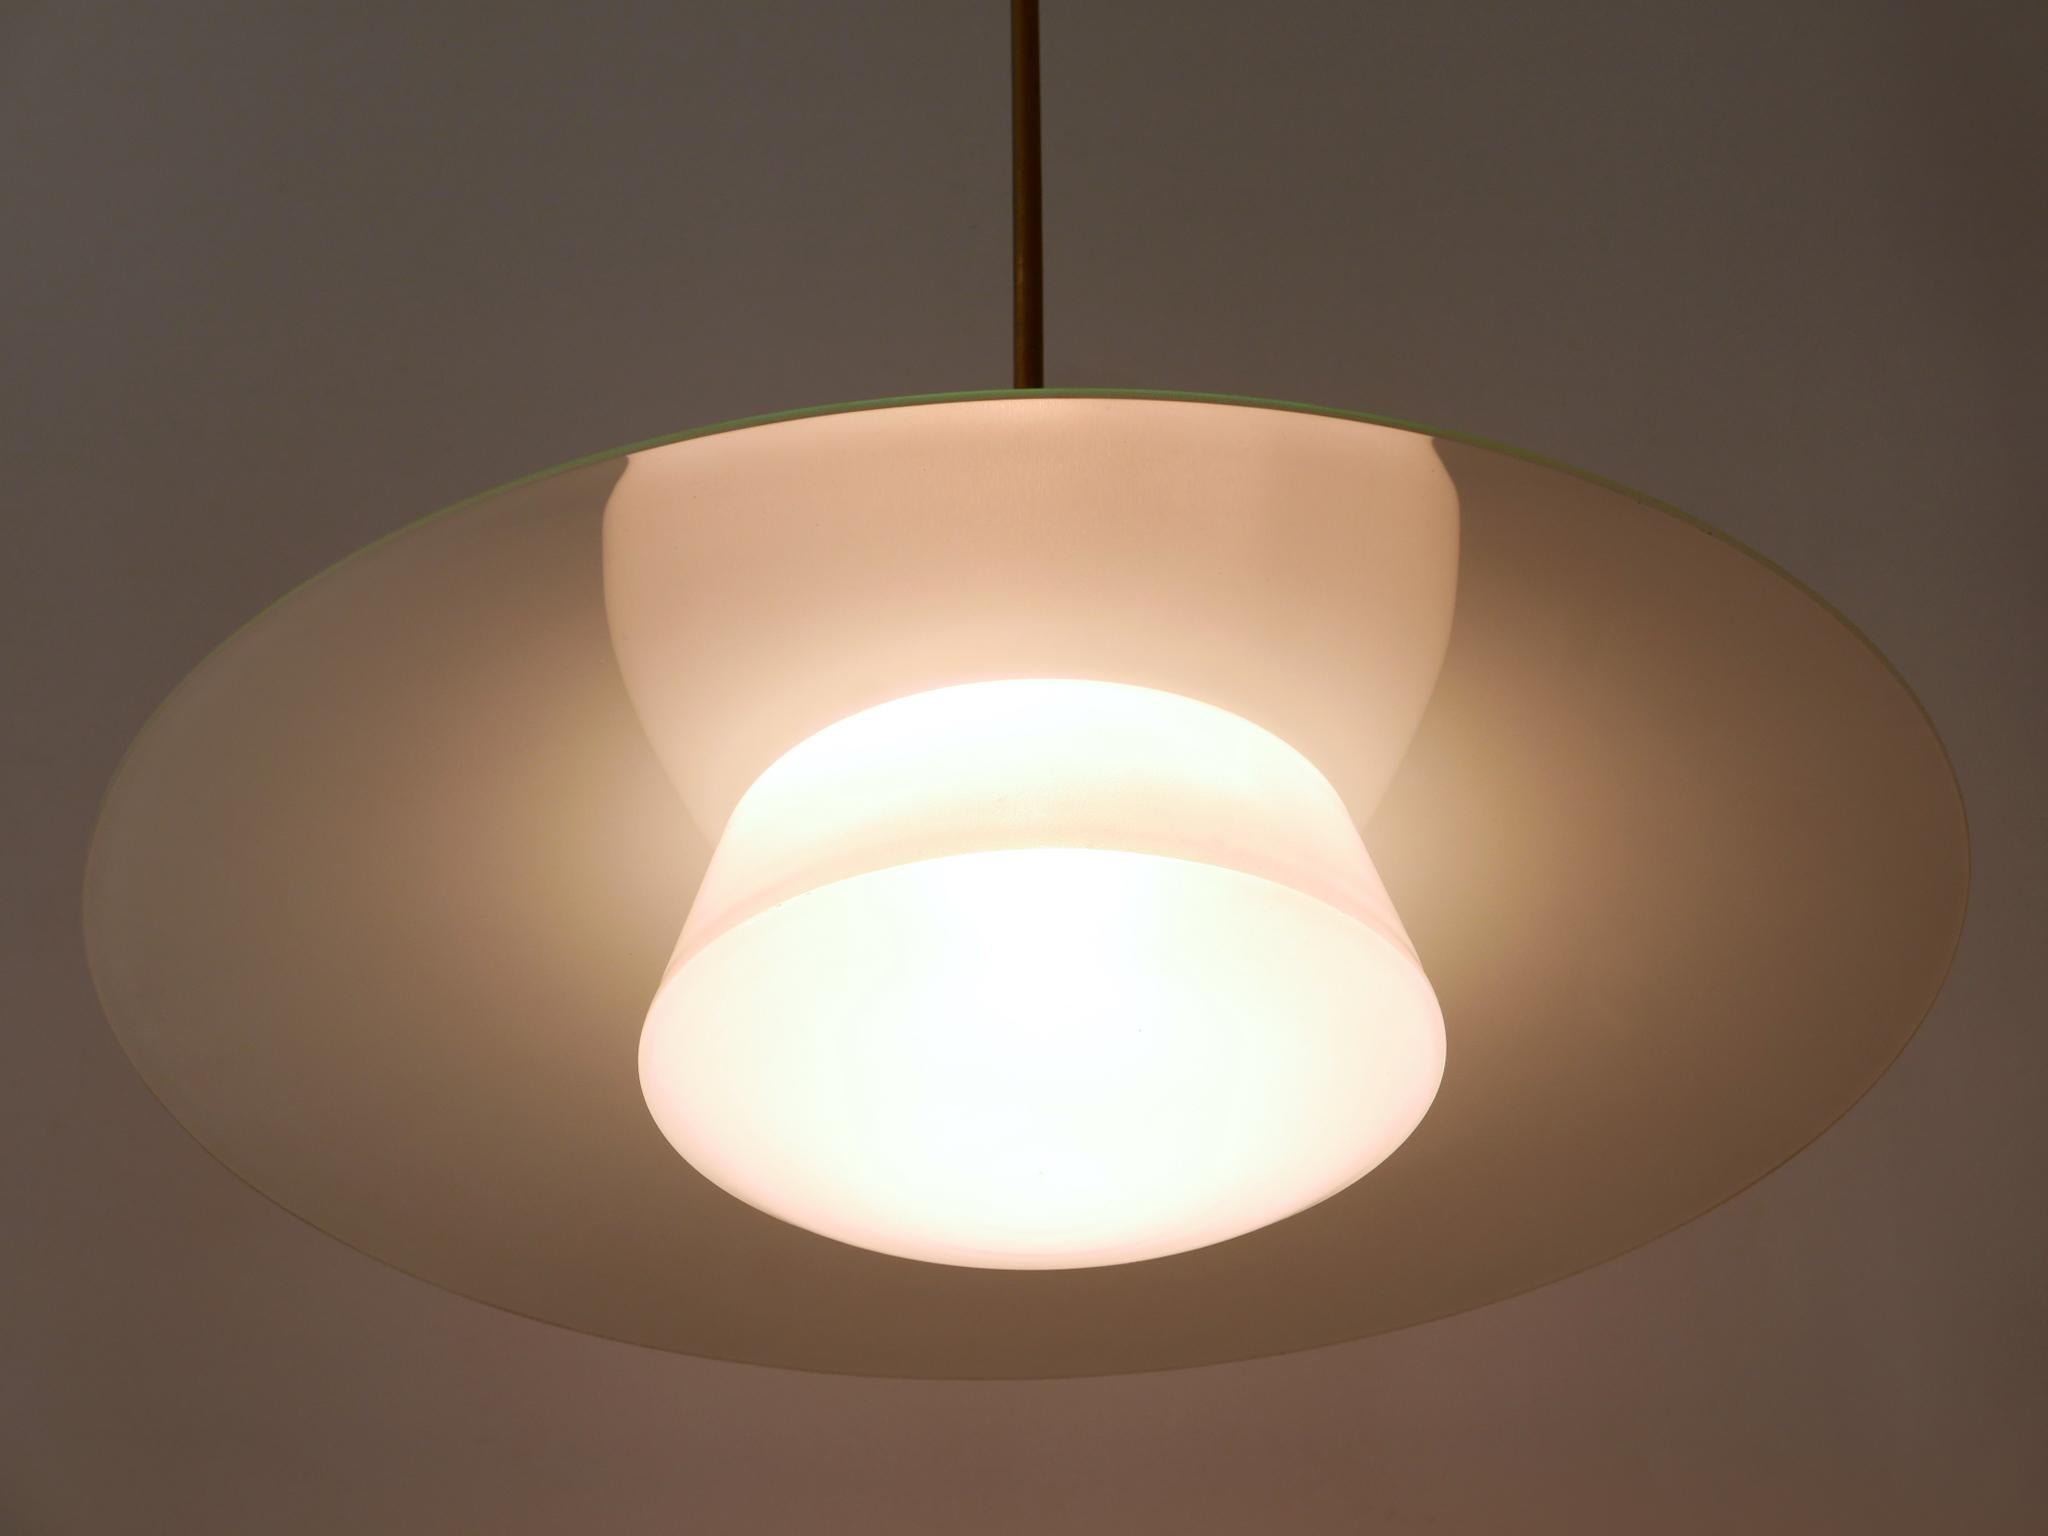 Rare Mid-Century Modern Pendant Lamp by Wolfgang Tümpel for Doria Germany 1950s For Sale 2